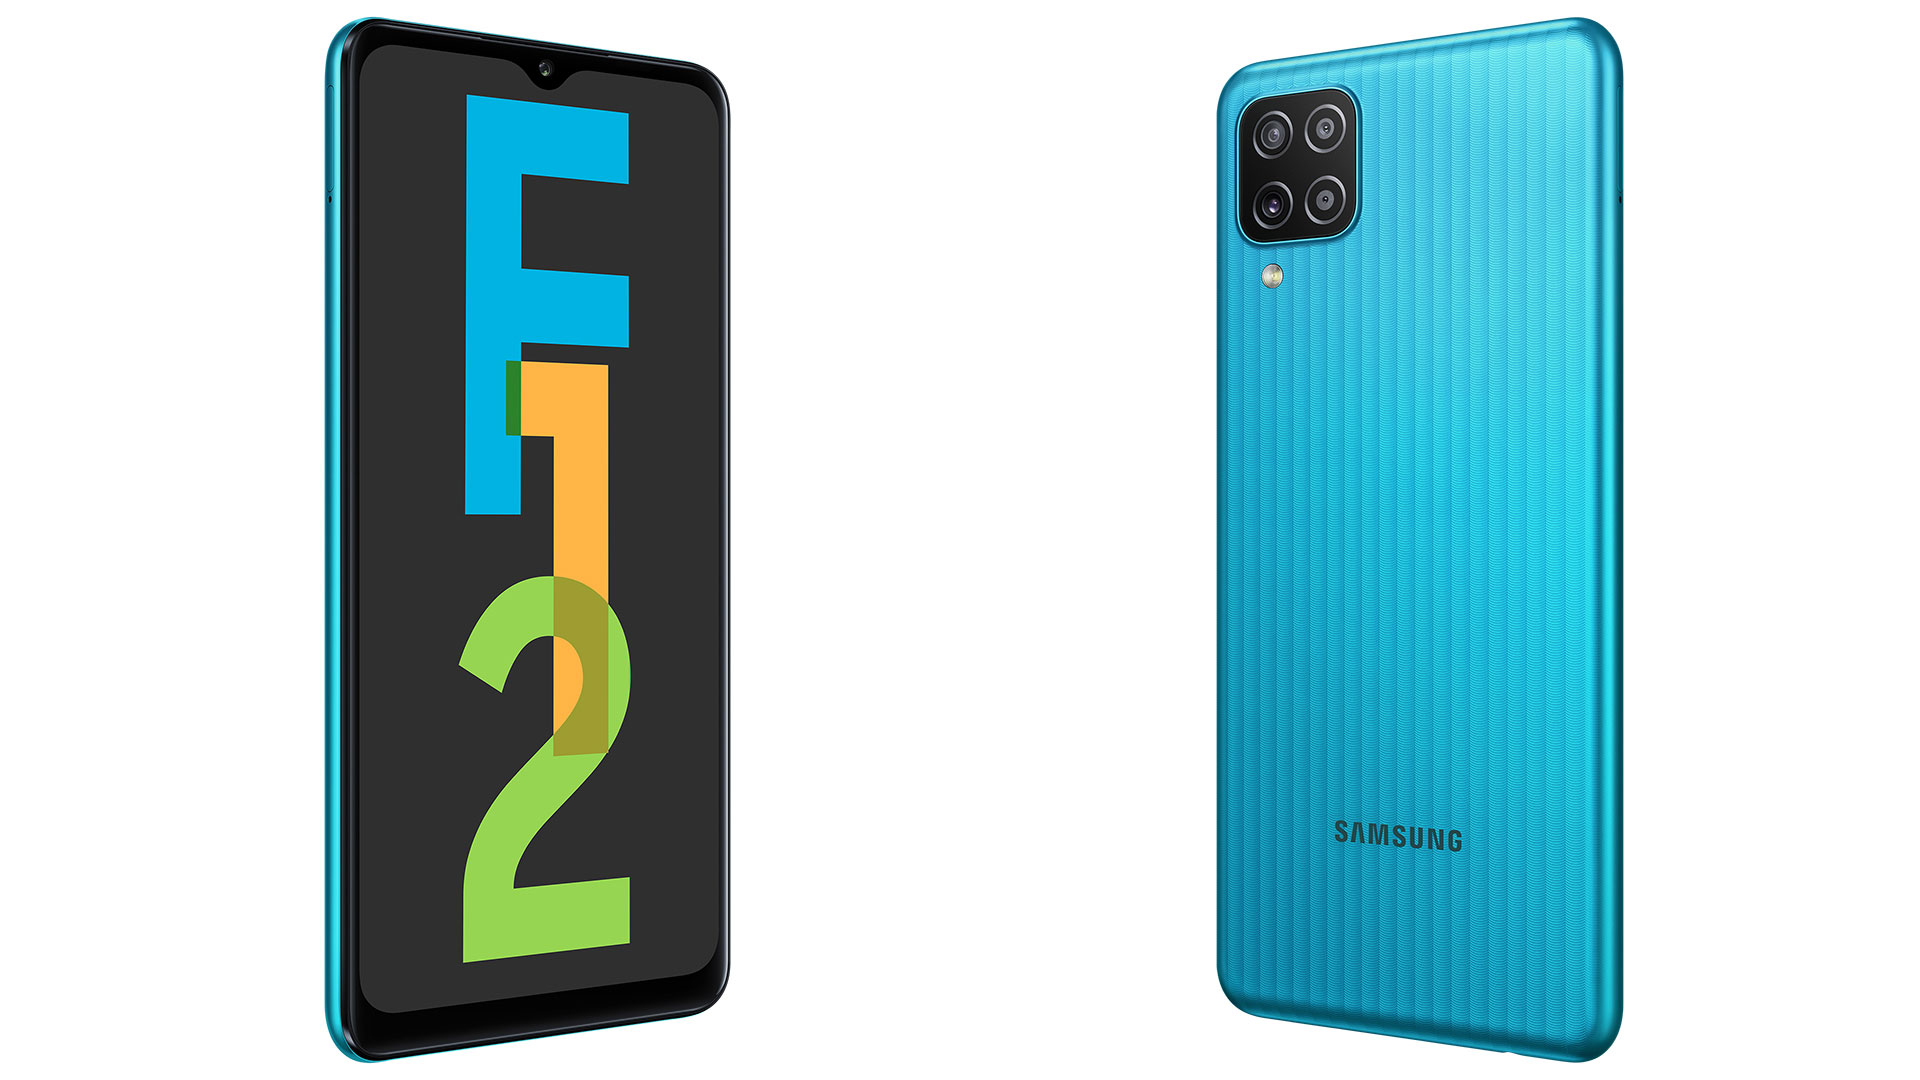 Samsung’s India-focused Galaxy F12 packs a 90Hz display at a low price